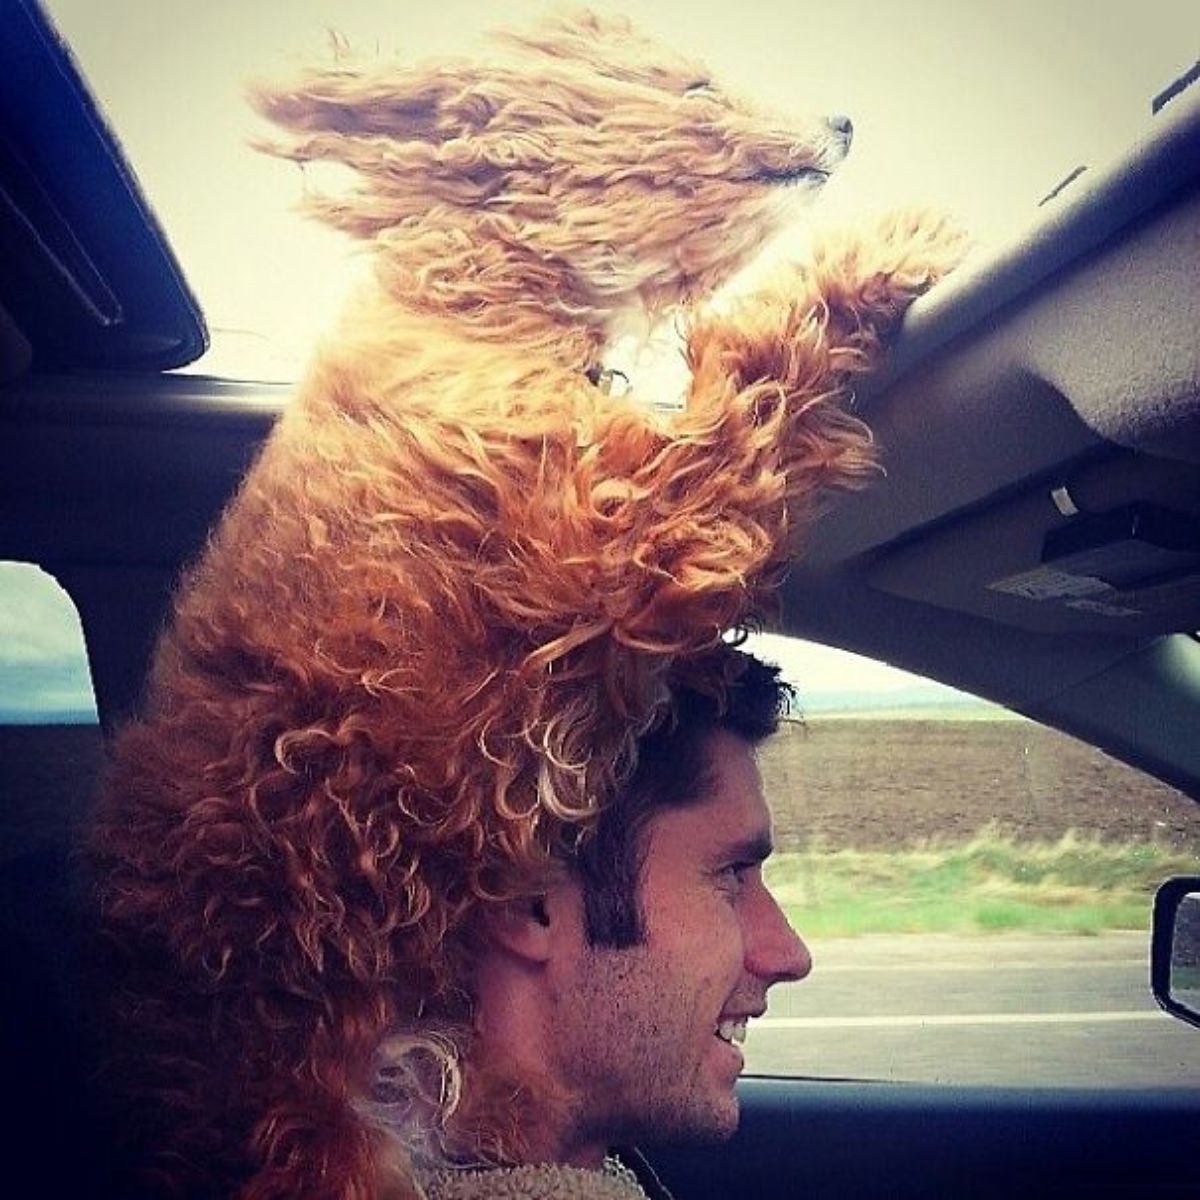 fluffy brown and white poodle sitting on a man's head and looking out through the sunroof